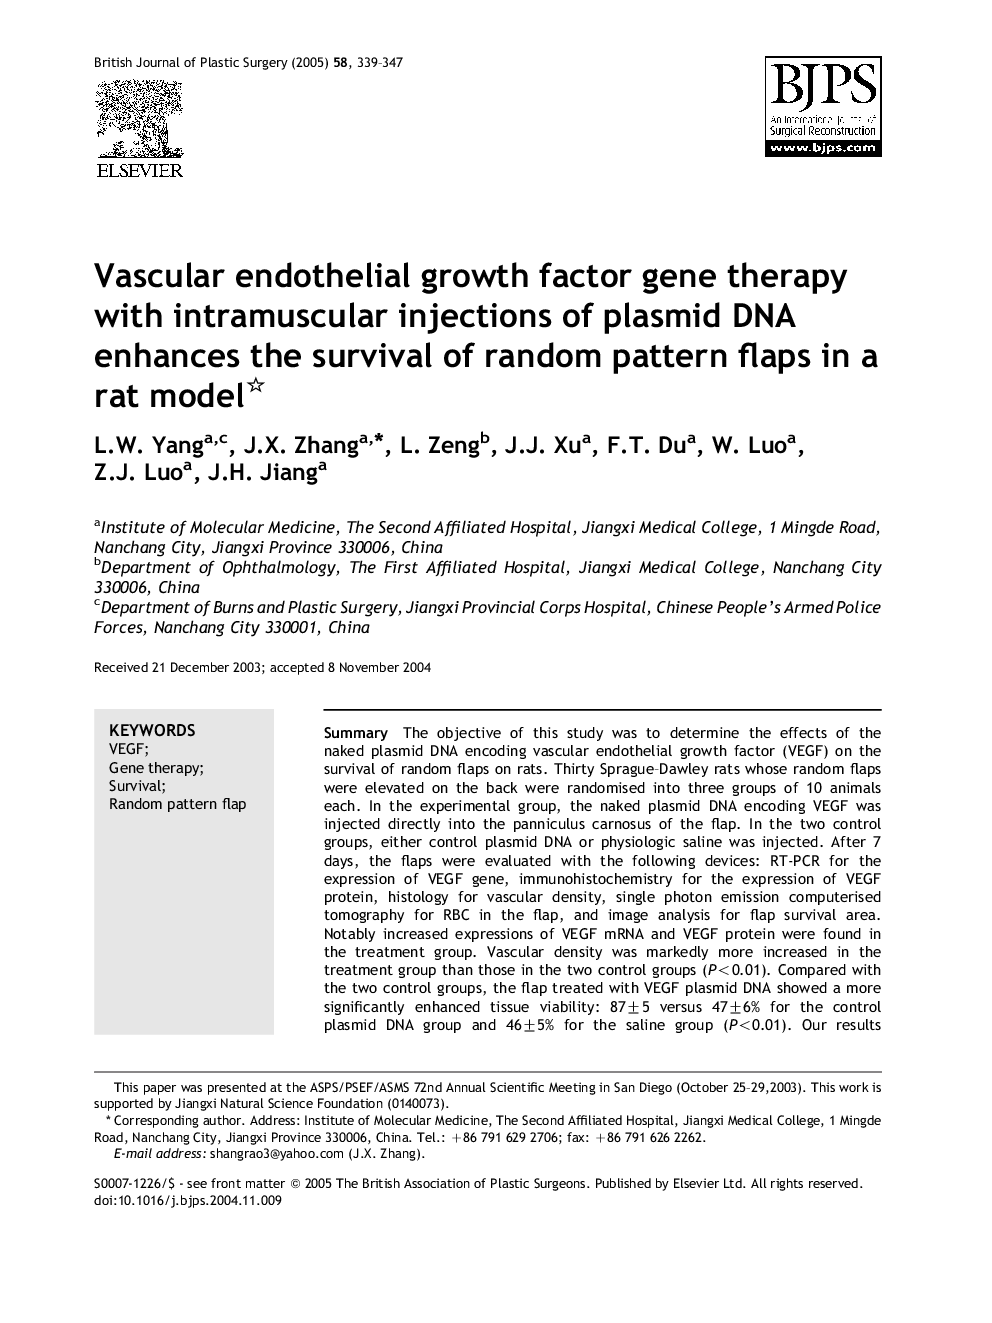 Vascular endothelial growth factor gene therapy with intramuscular injections of plasmid DNA enhances the survival of random pattern flaps in a rat model